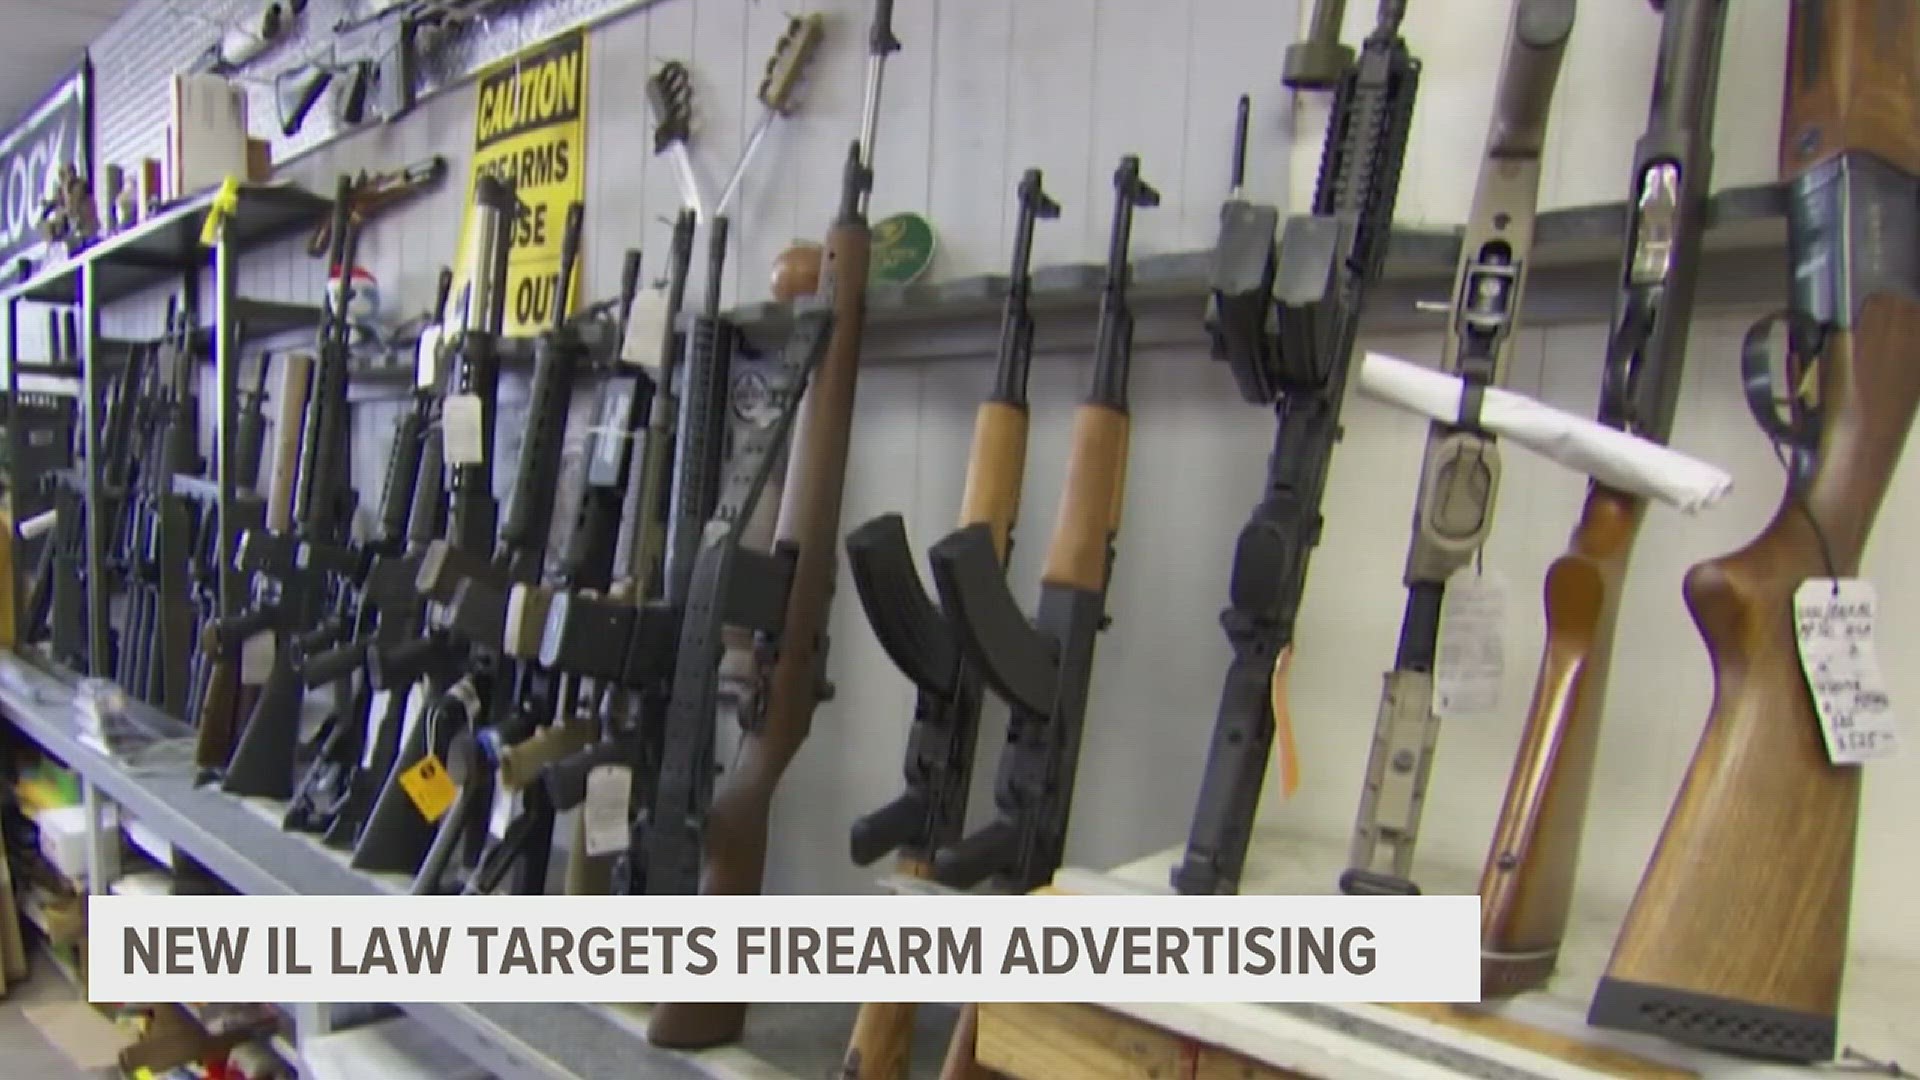 Gun advertisers are now facing restrictions in the state of Illinois after the governor signed the 'Firearm Industry Responsibility Act' into law this week.